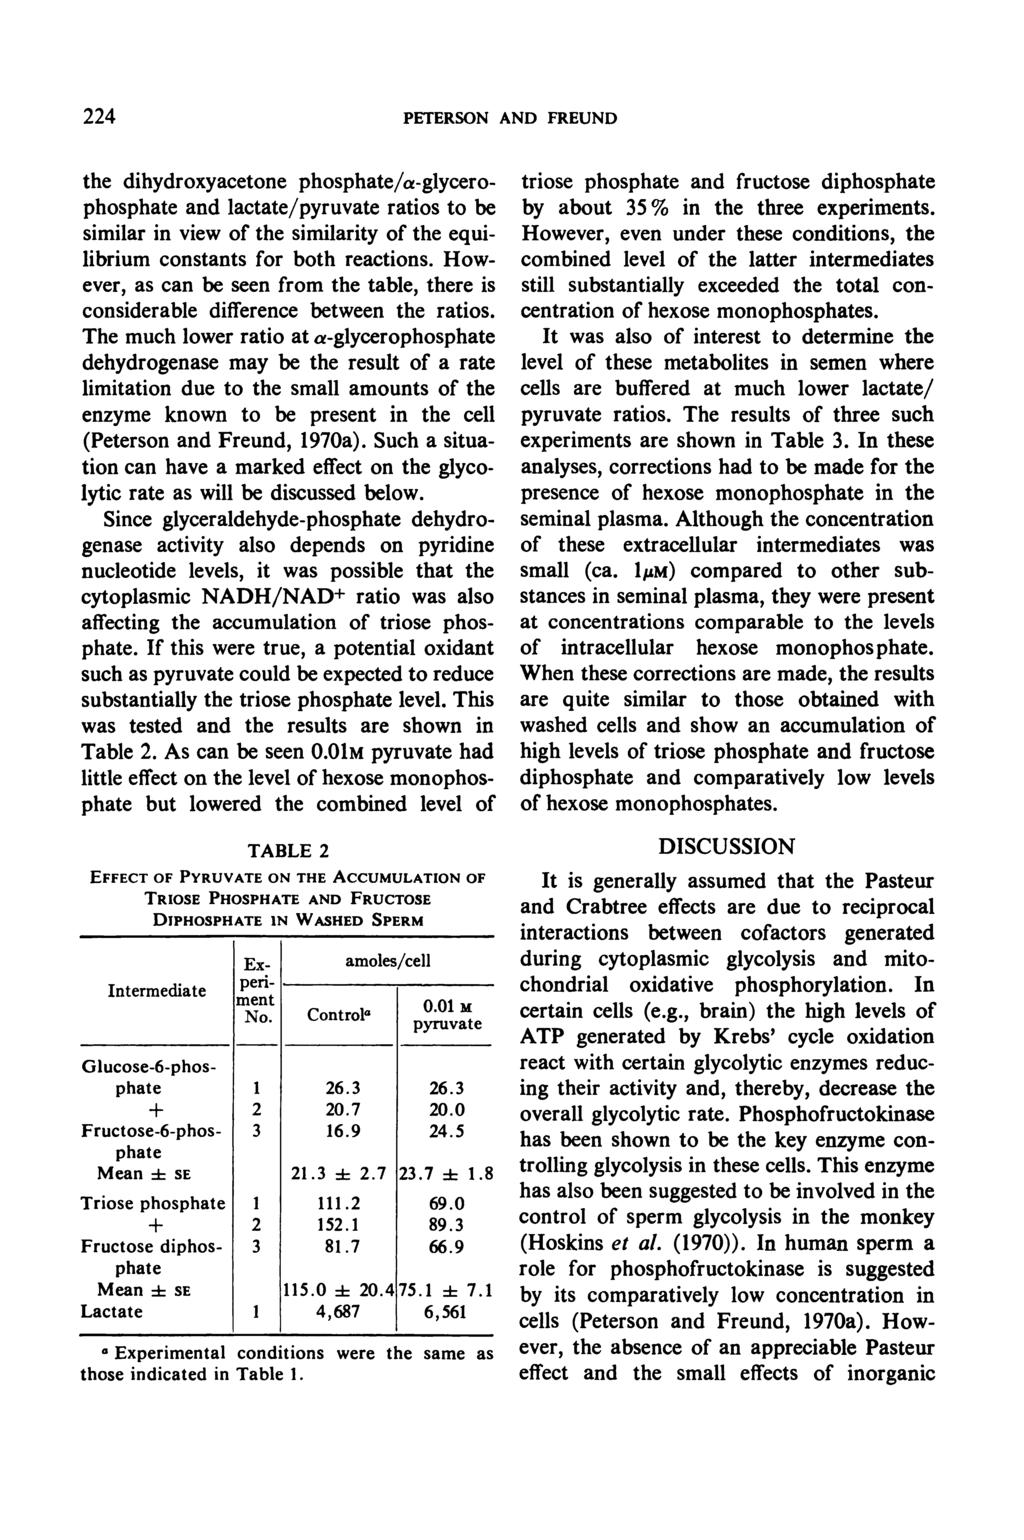 224 PETERSON AND FREUND the dihydroxyacetone phosphate/a-glycerophosphate and lactate/pyruvate ratios to be similar in view of the similarity of the equilibrium constants for both reactions.